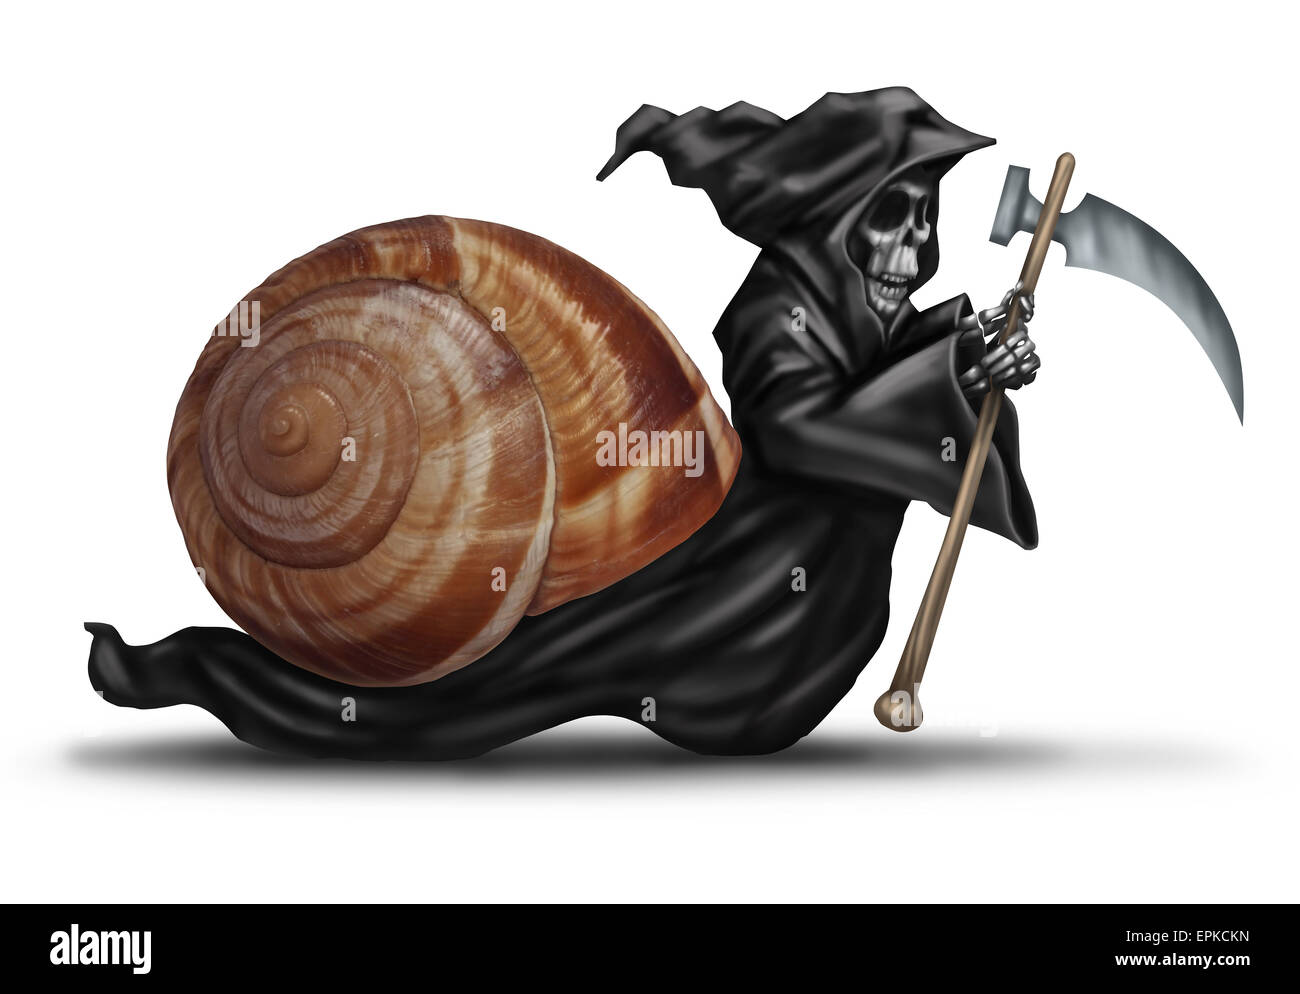 Slow aging health care concept as a snail shell with a grim reaper character moving slowly as a health care metaphor for delaying death and living a healthy longer life. Stock Photo